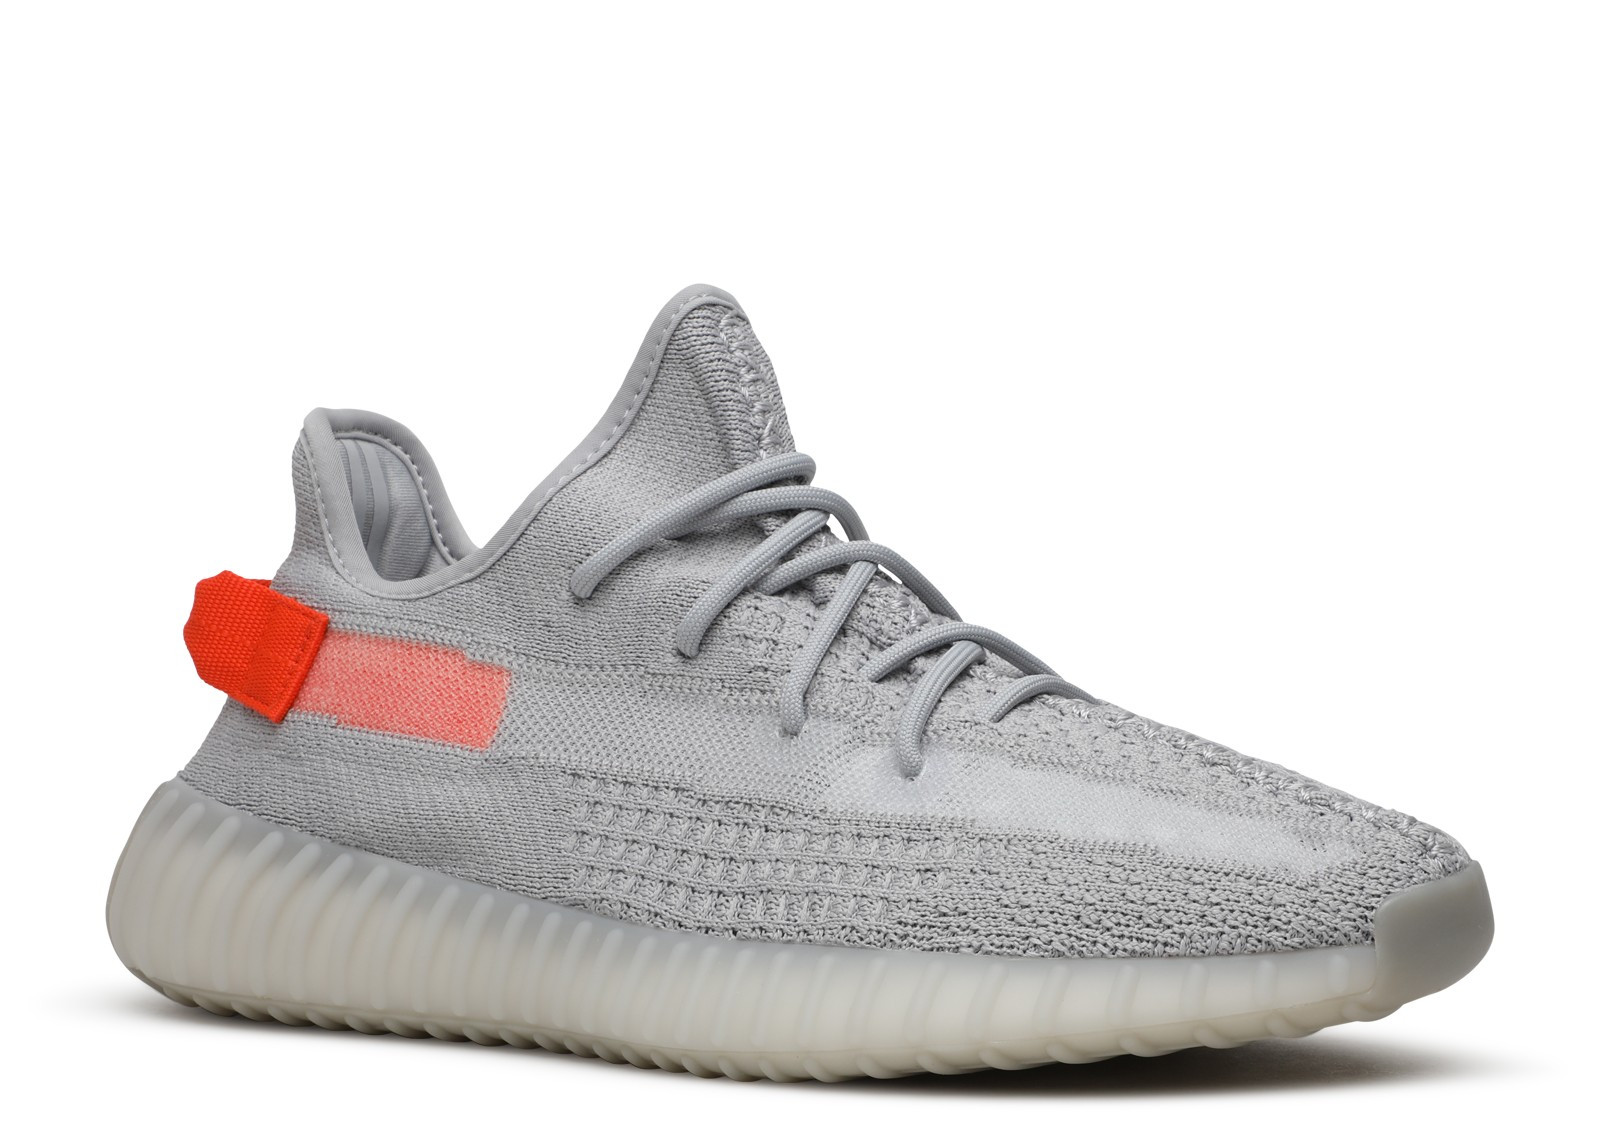 YEEZY BOOST 350 V2 TAIL LIGHT image 2